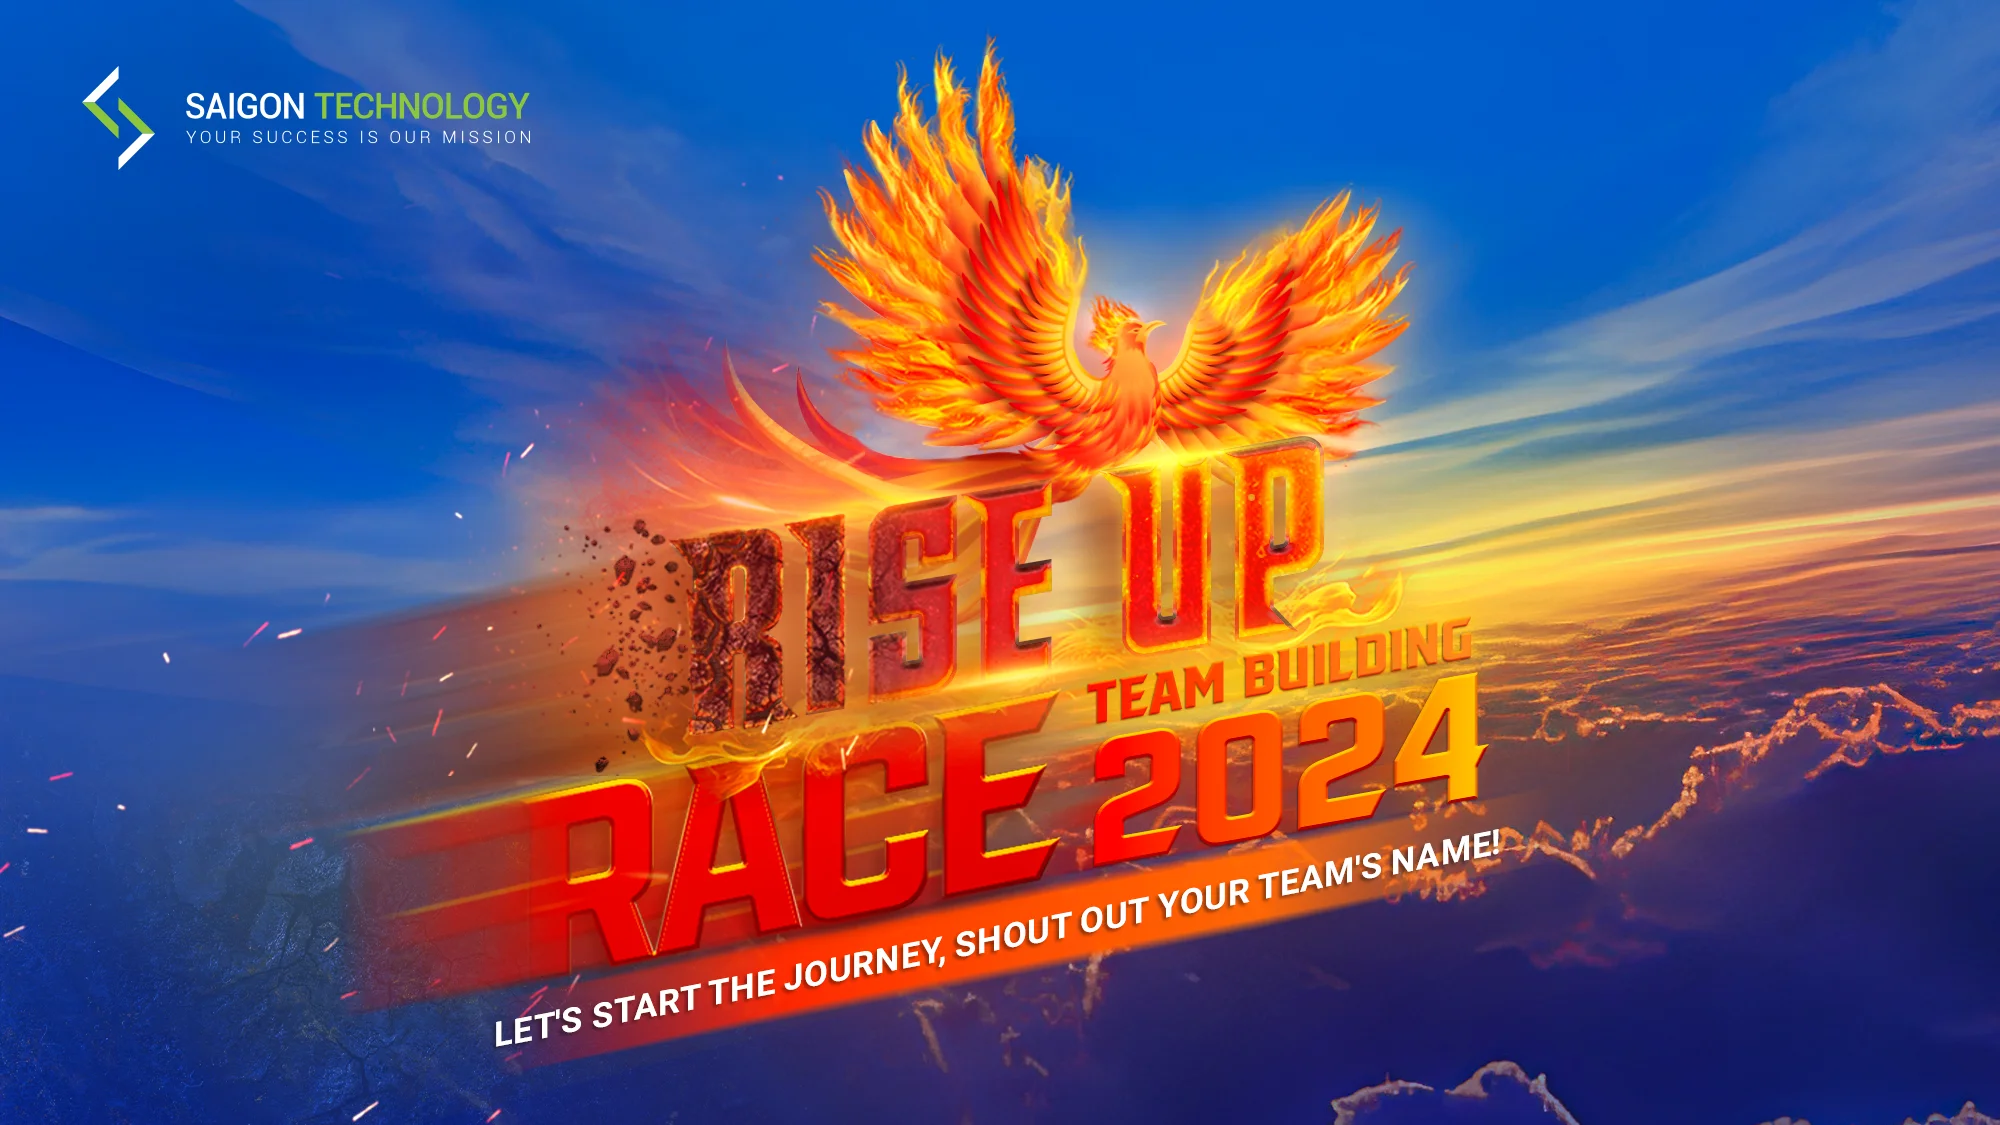 LET’S KICK OFF- Start The Journey & Shout Out Your Team’s Name!